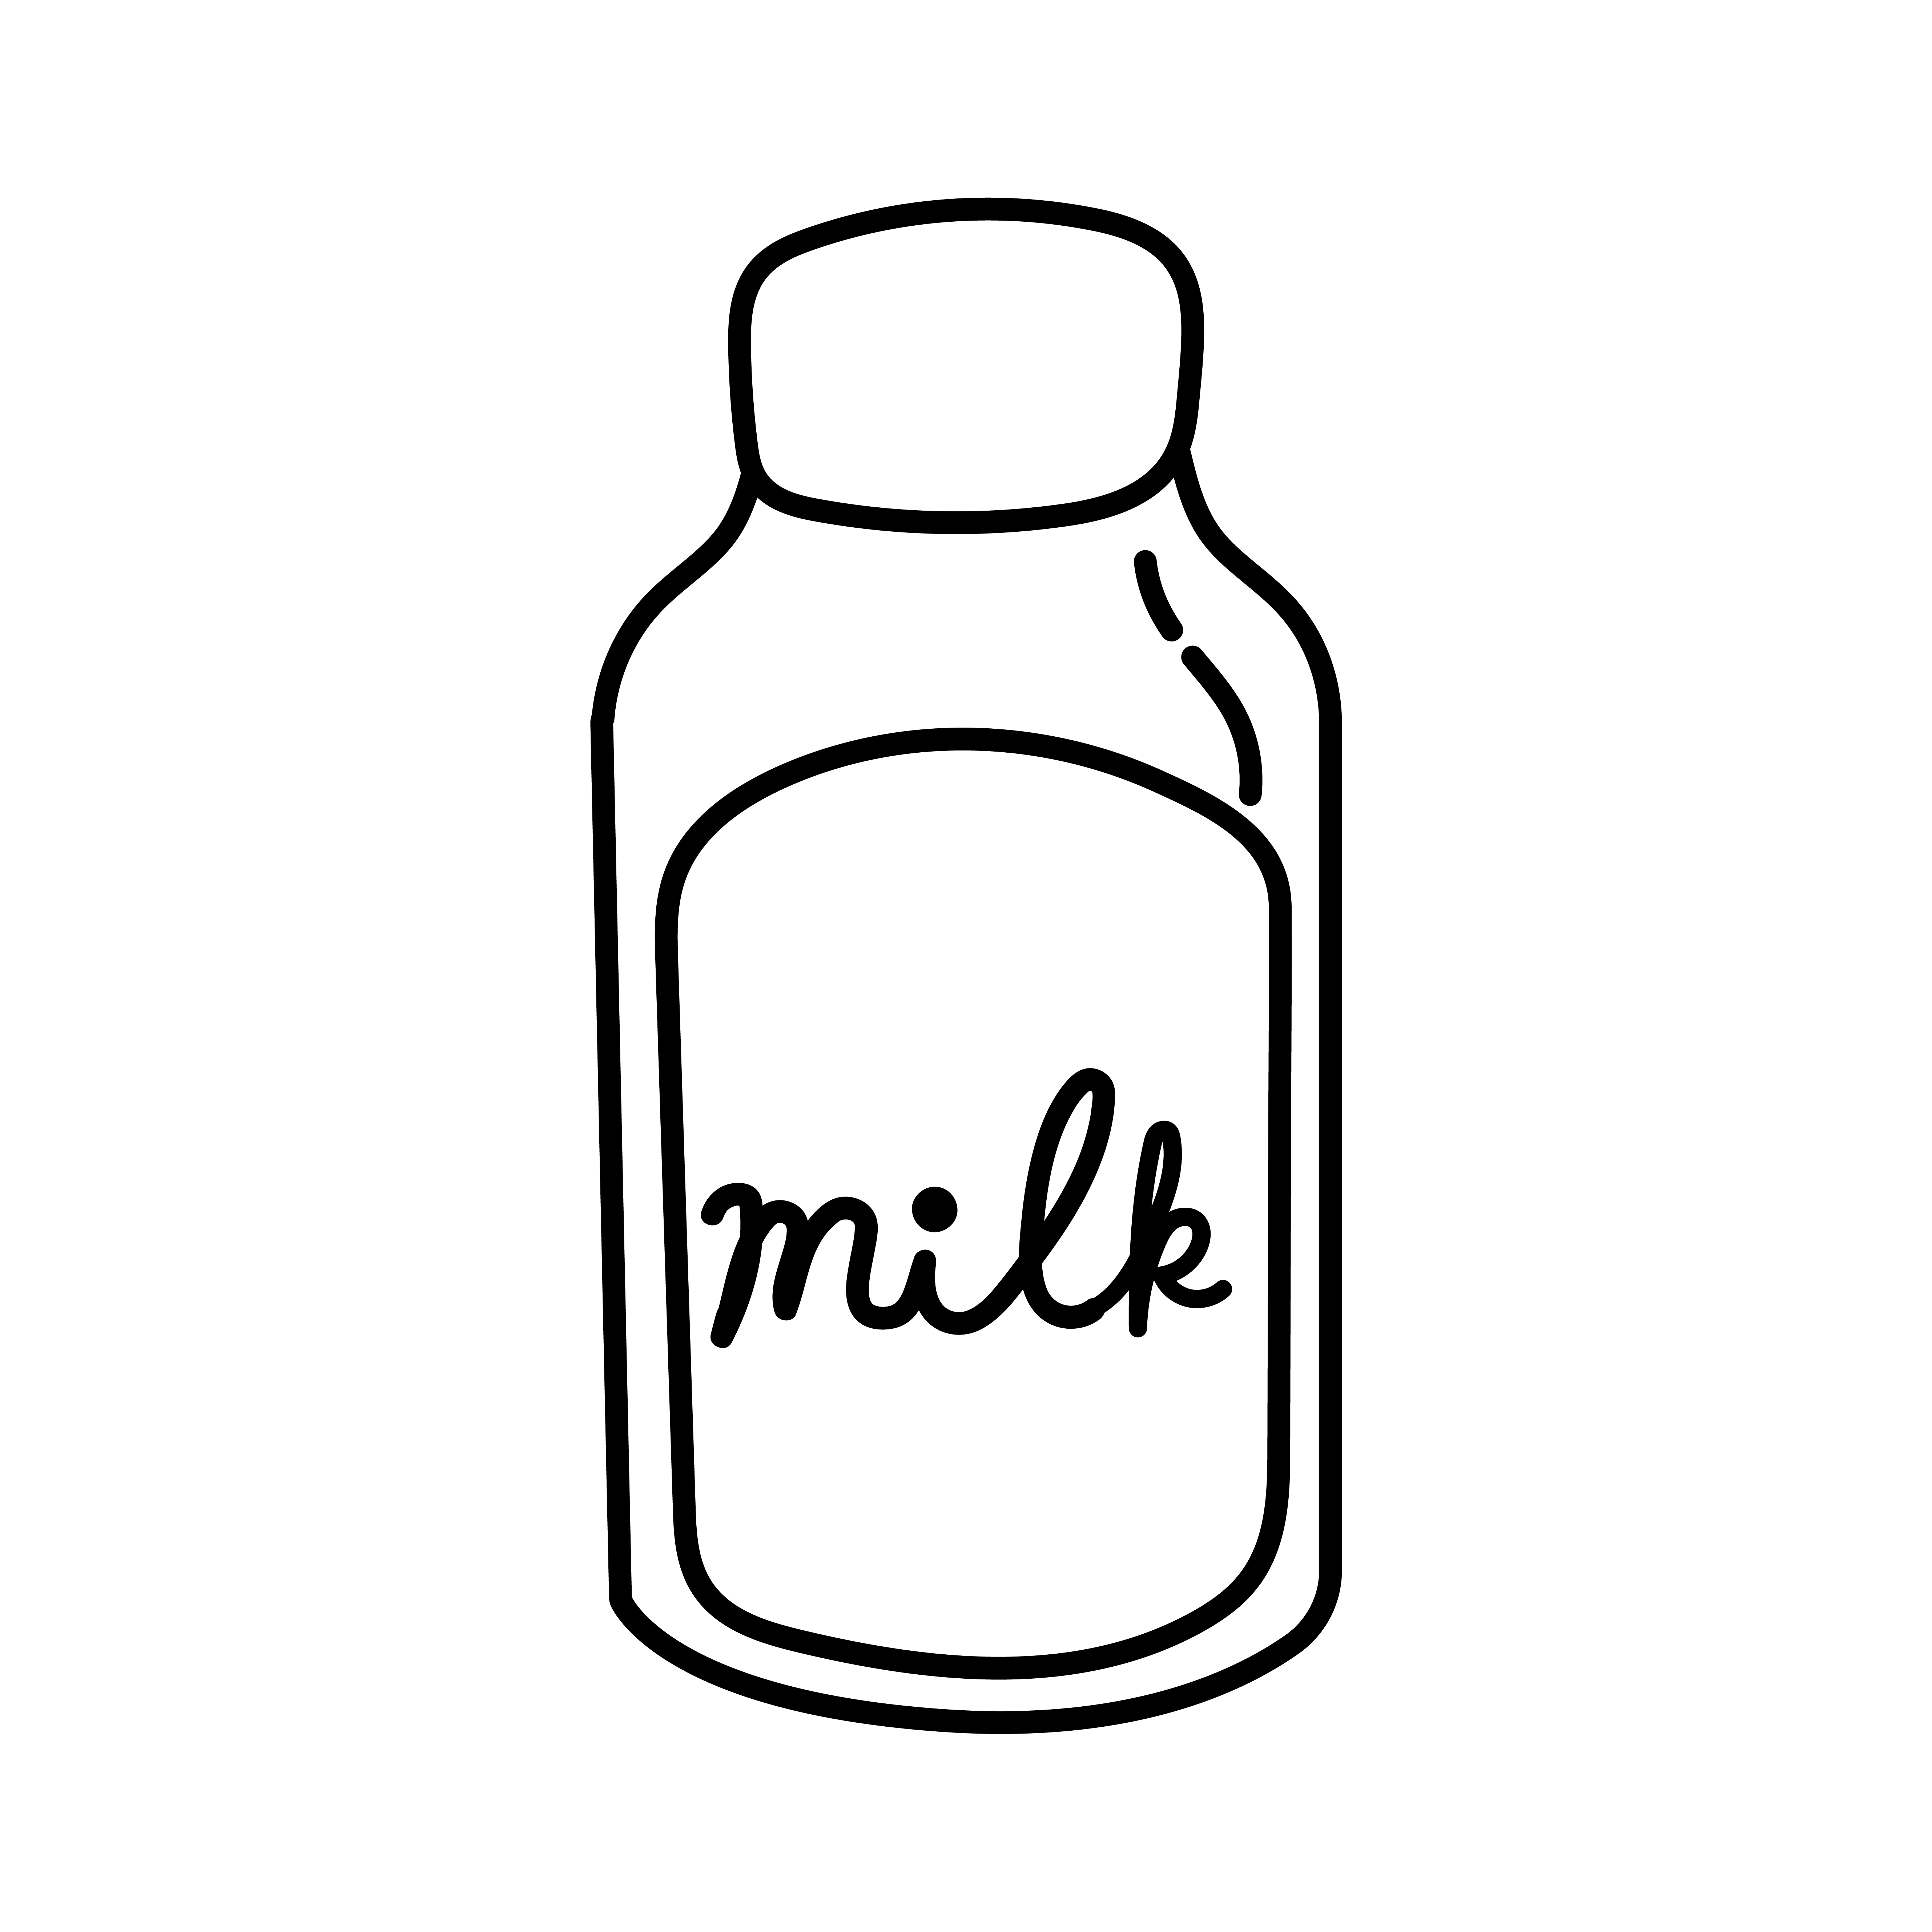 https://static.vecteezy.com/system/resources/previews/002/577/055/original/milk-in-jar-line-style-icon-free-vector.jpg